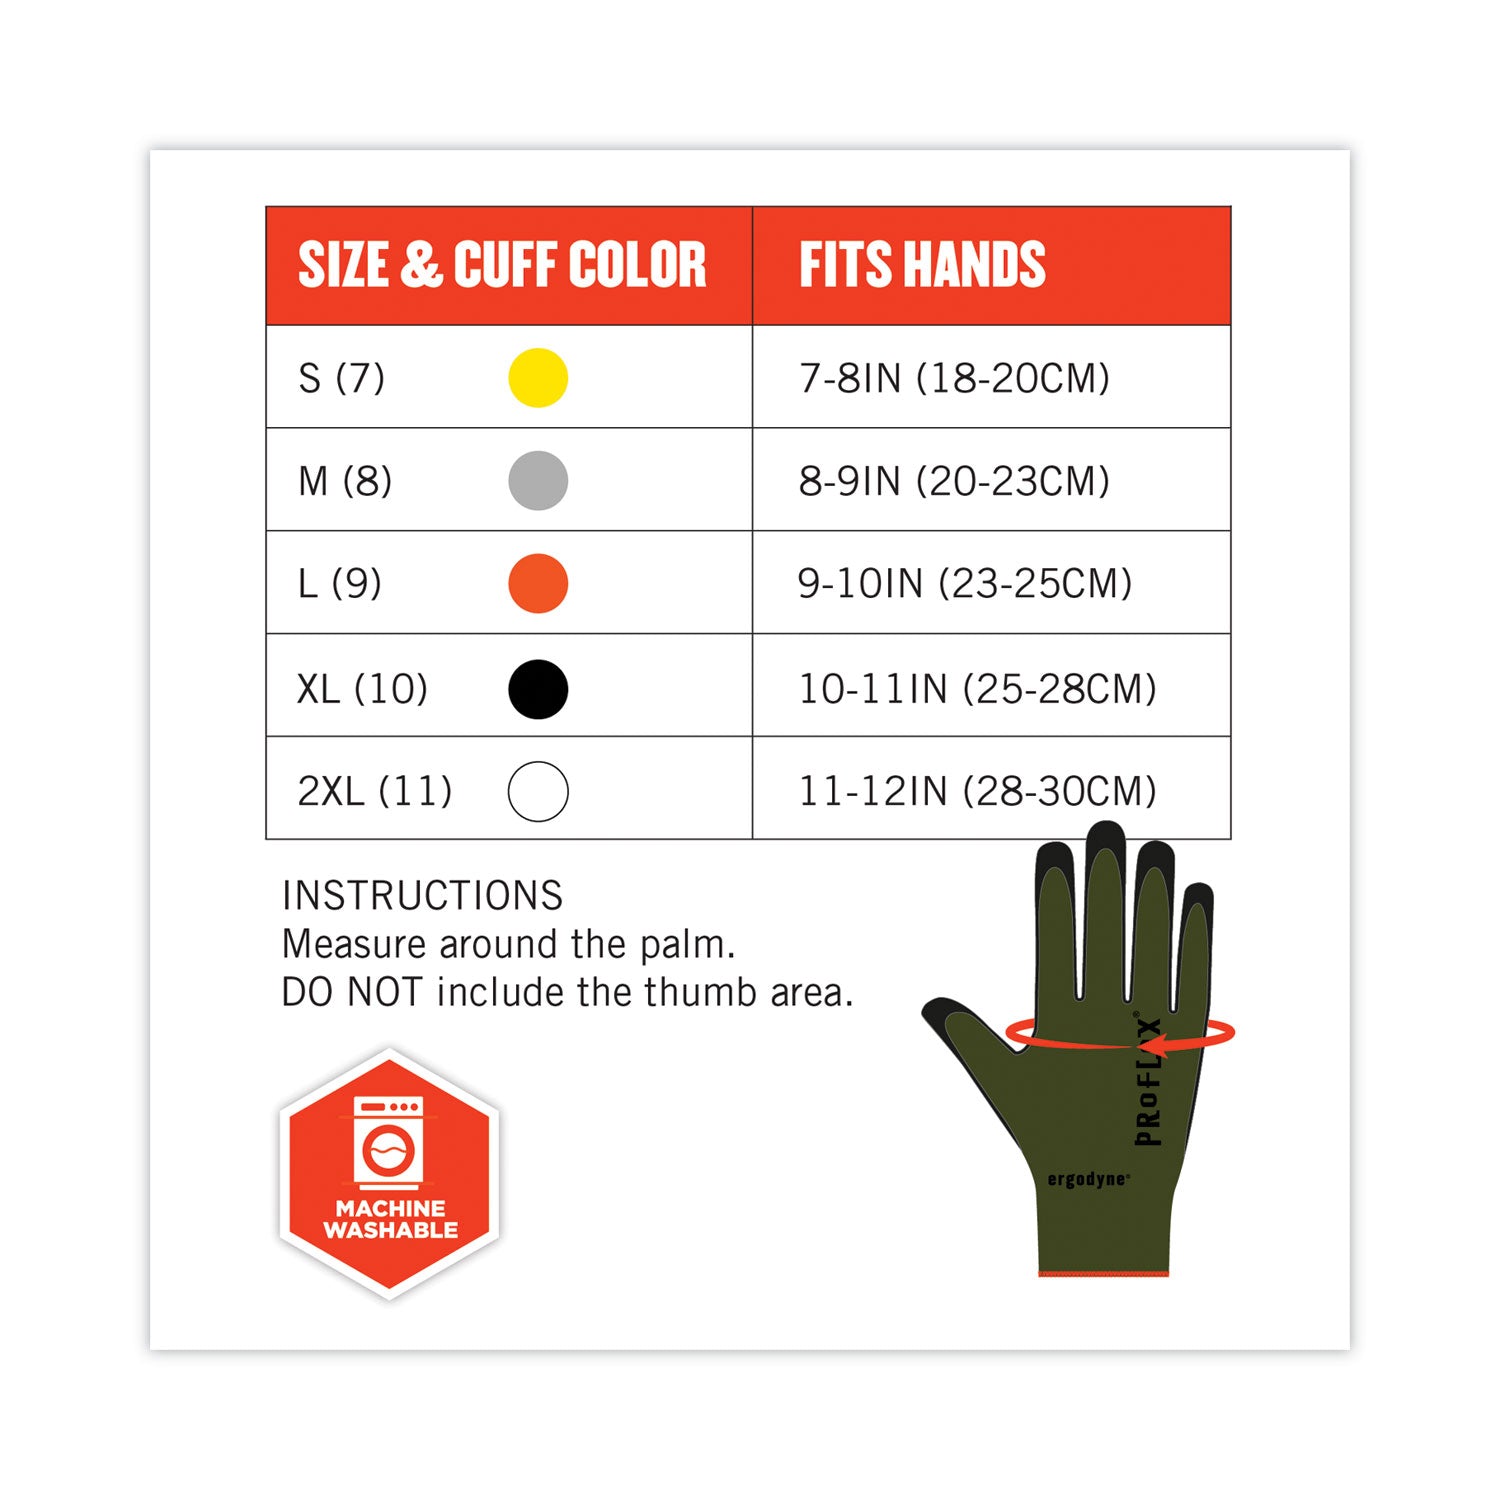 proflex-7042-ansi-a4-nitrile-coated-cr-gloves-green-medium-12-pairs-pack-ships-in-1-3-business-days_ego10333 - 7